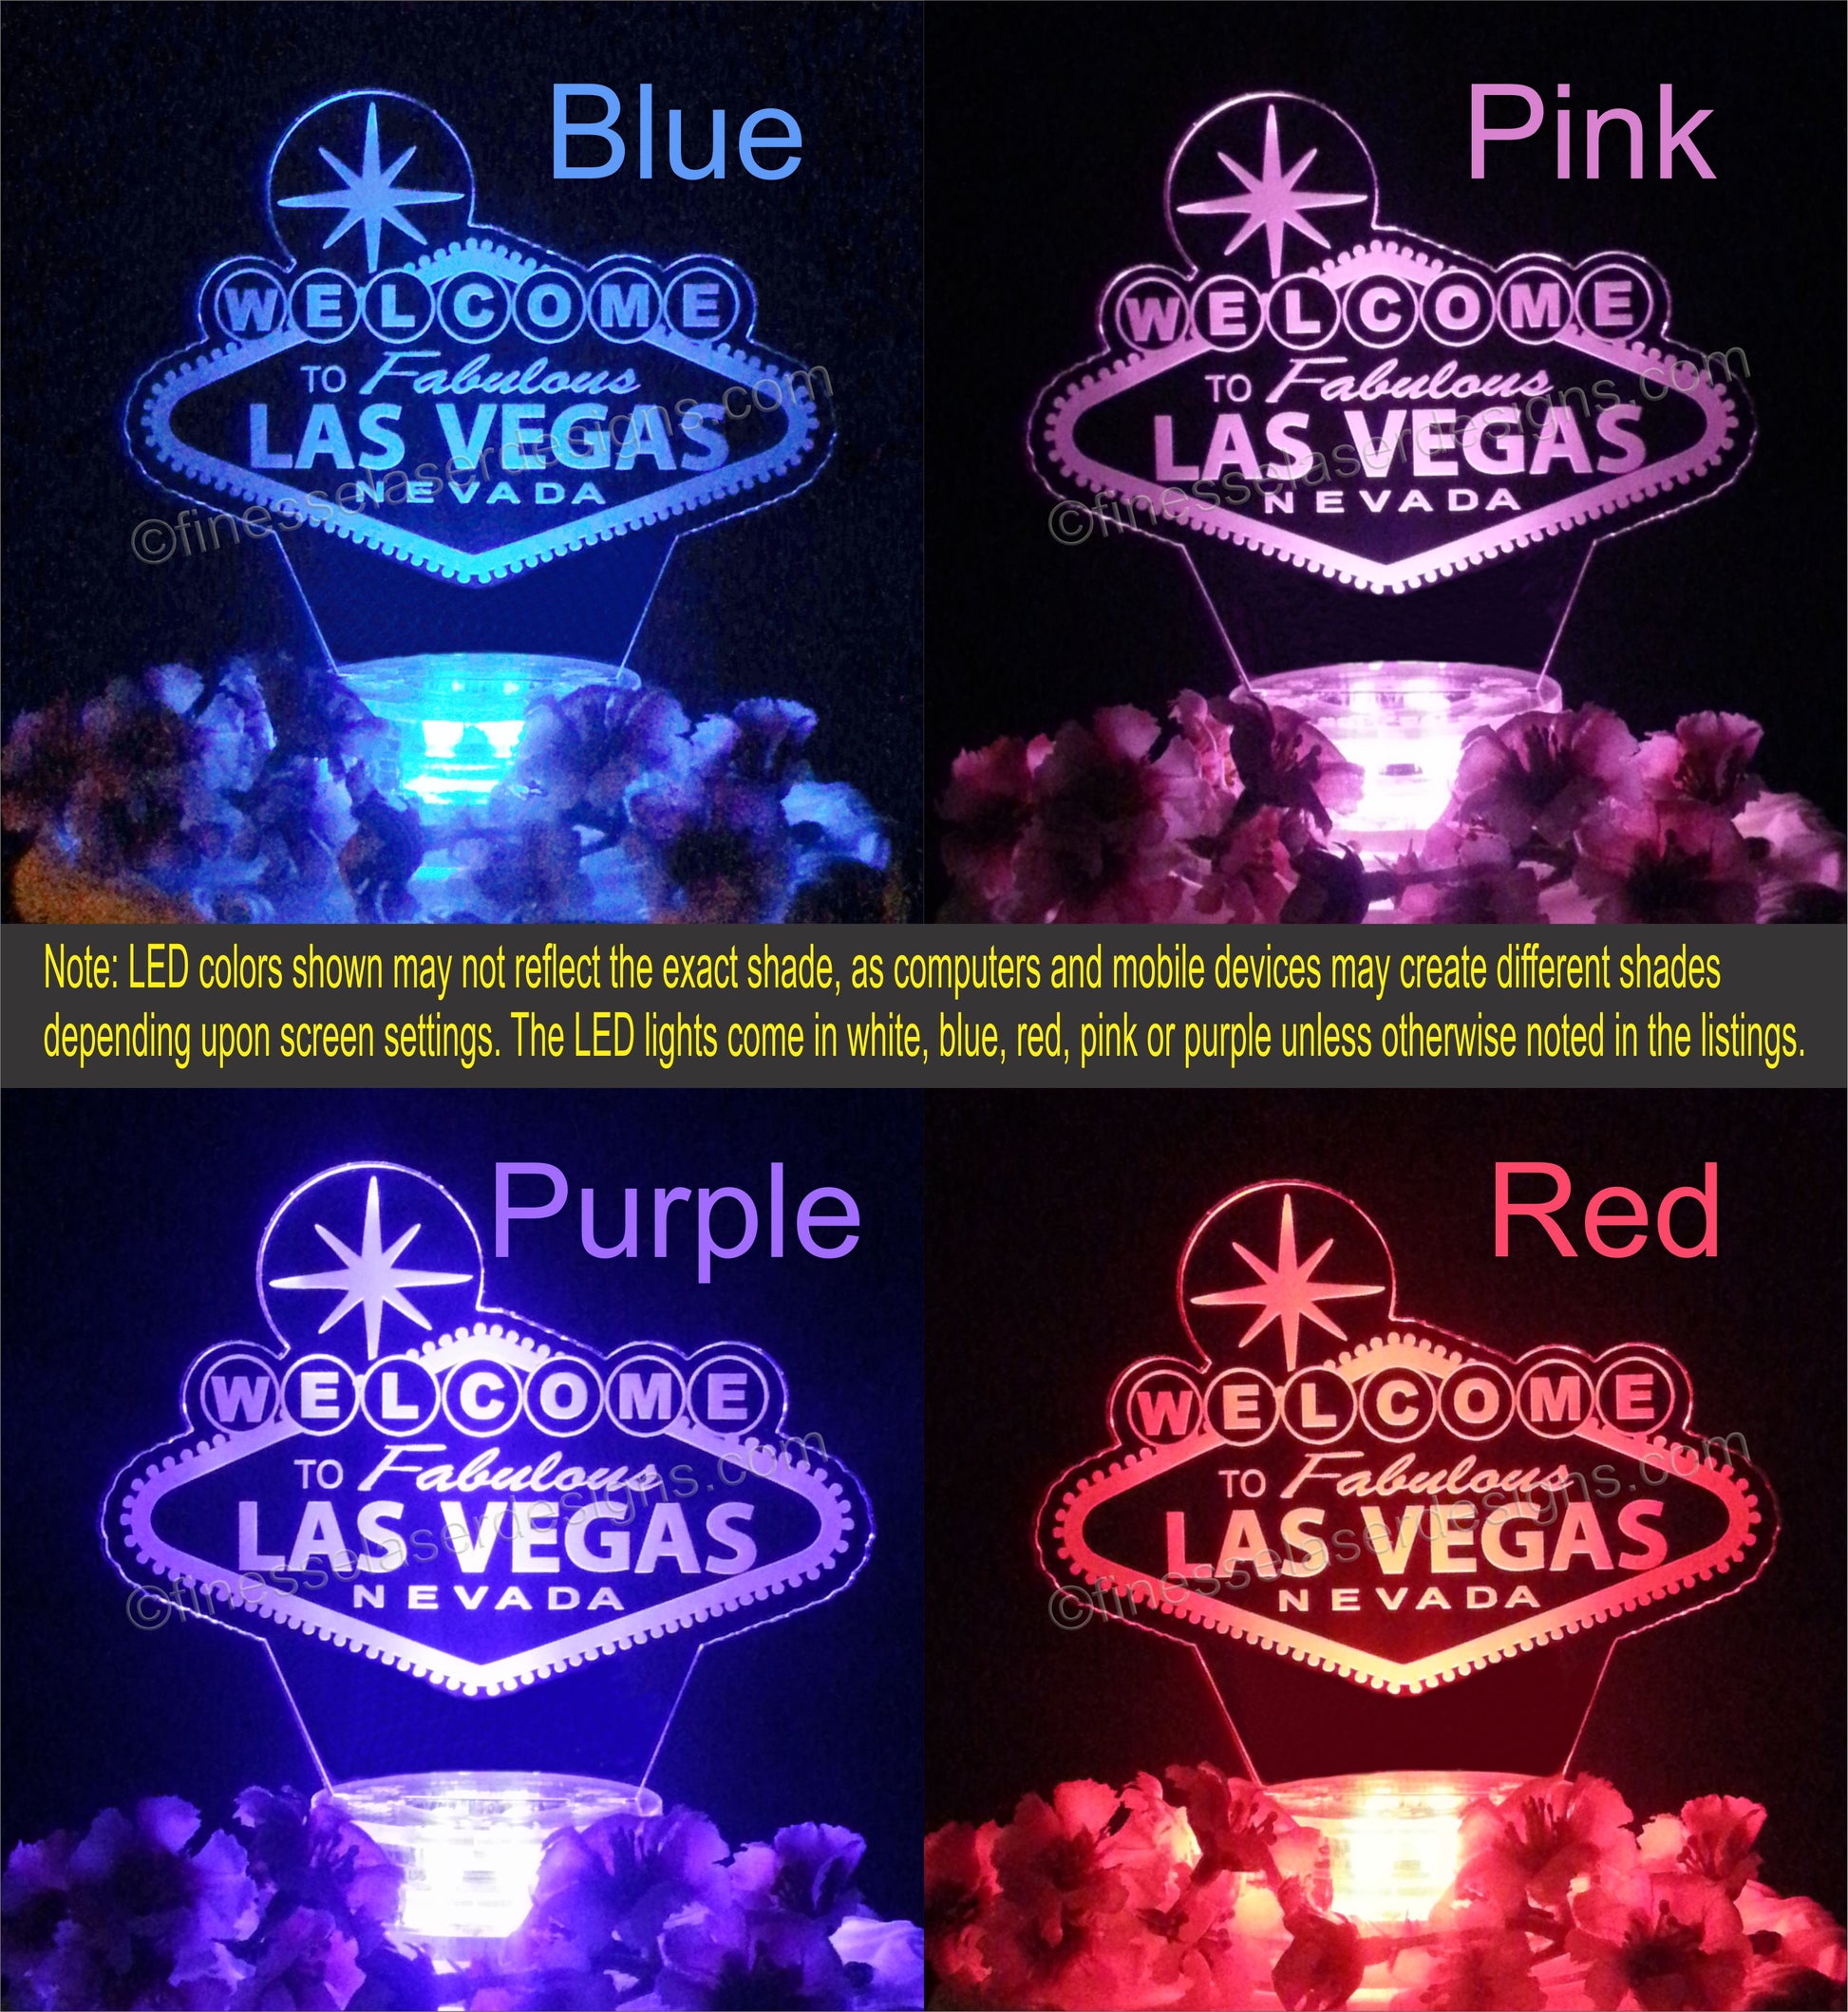 Lighted Welcome to Las Vegas acrylic cake topper shown in blue, pink, purple and red lights